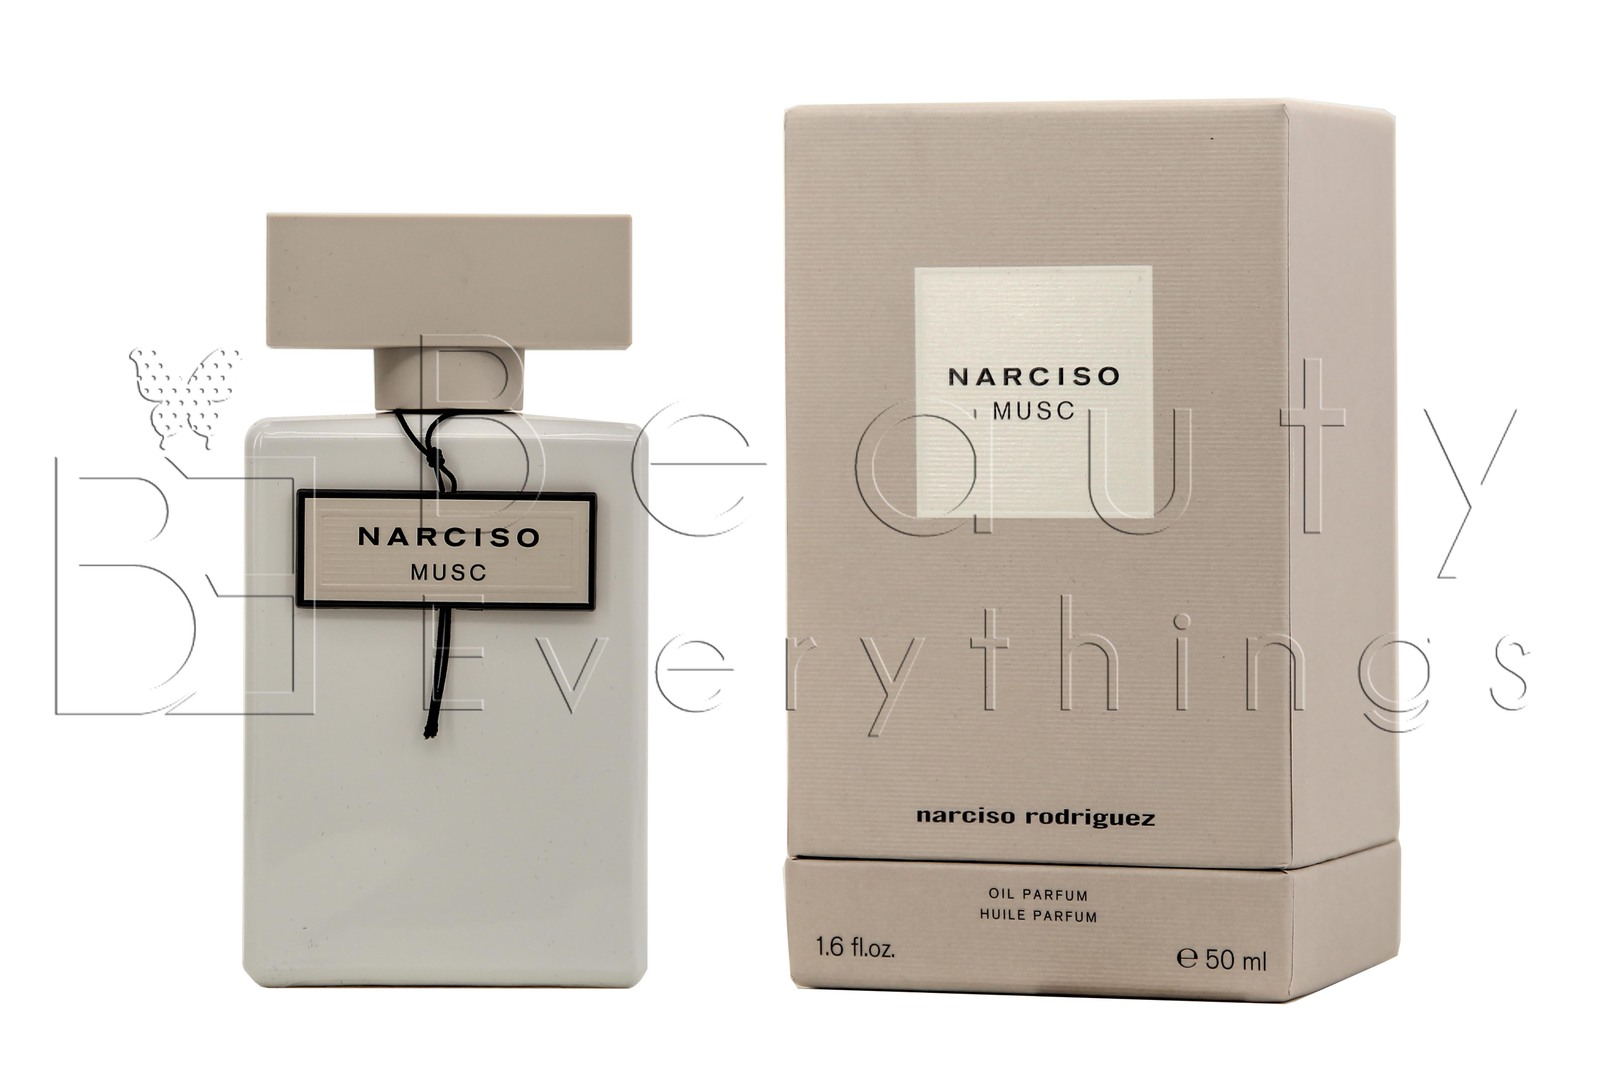 Narciso Musc by Narciso Rodriguez 1.6oz / 50ml Oil Parfum NIB Sealed For Women - $116.99